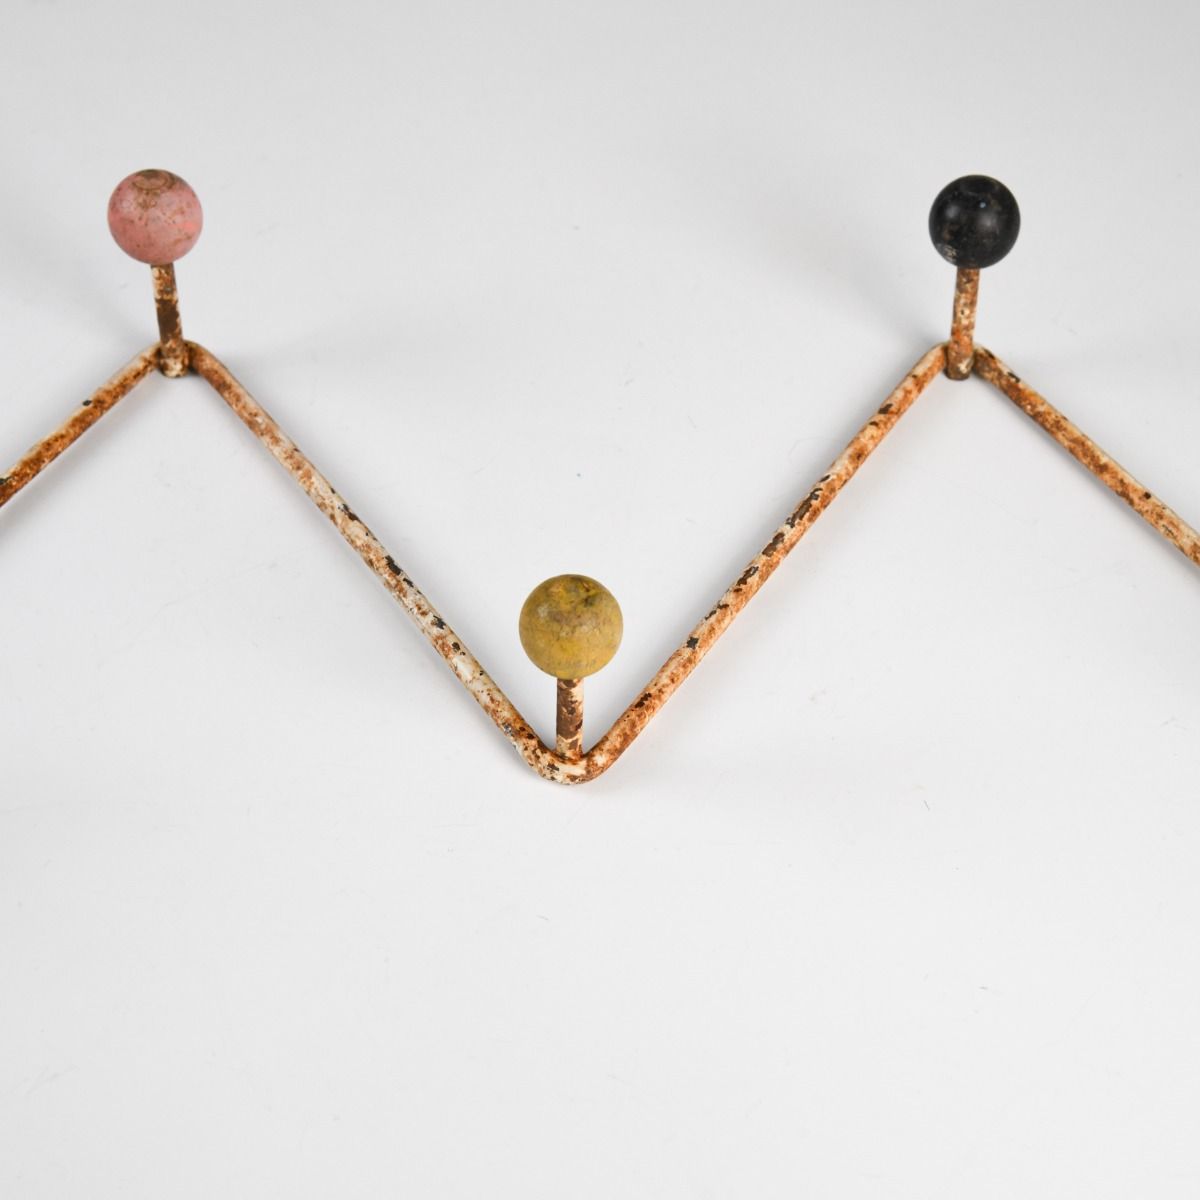 Eames Style Rusted Wall Coat Hanger